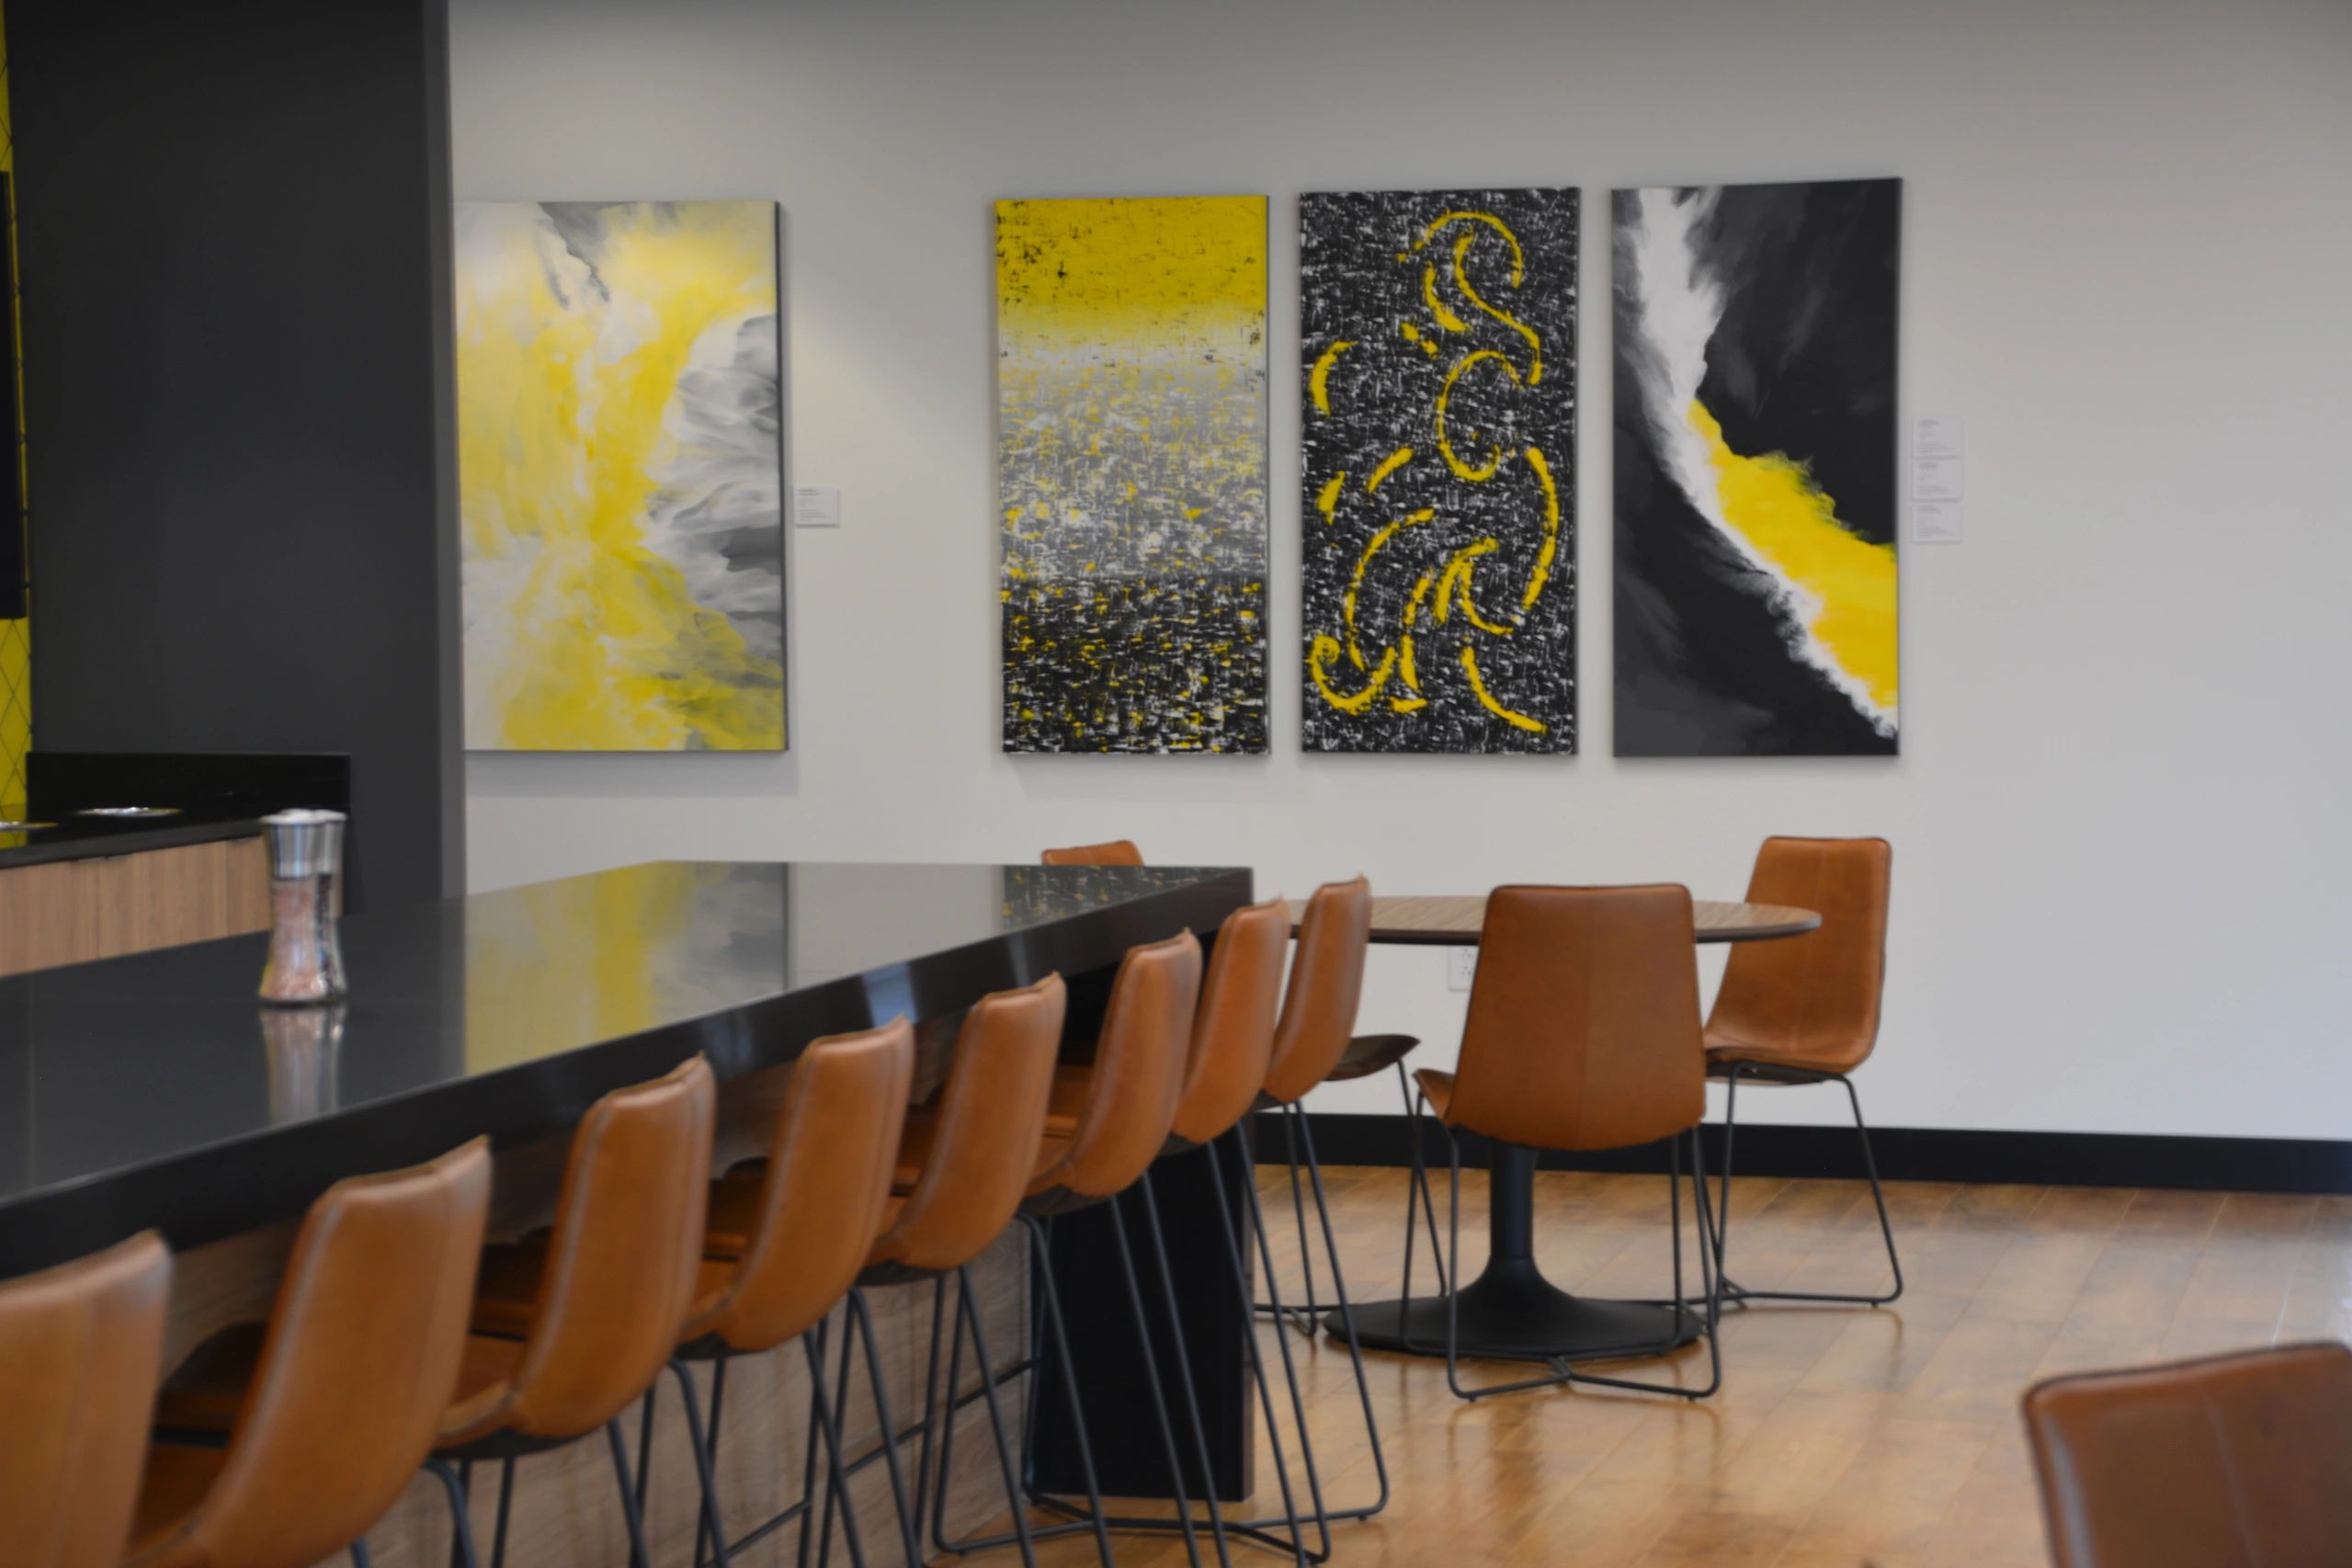 4 abstract paintings in a common area in an office. All are black, white, yellow and gray designs.